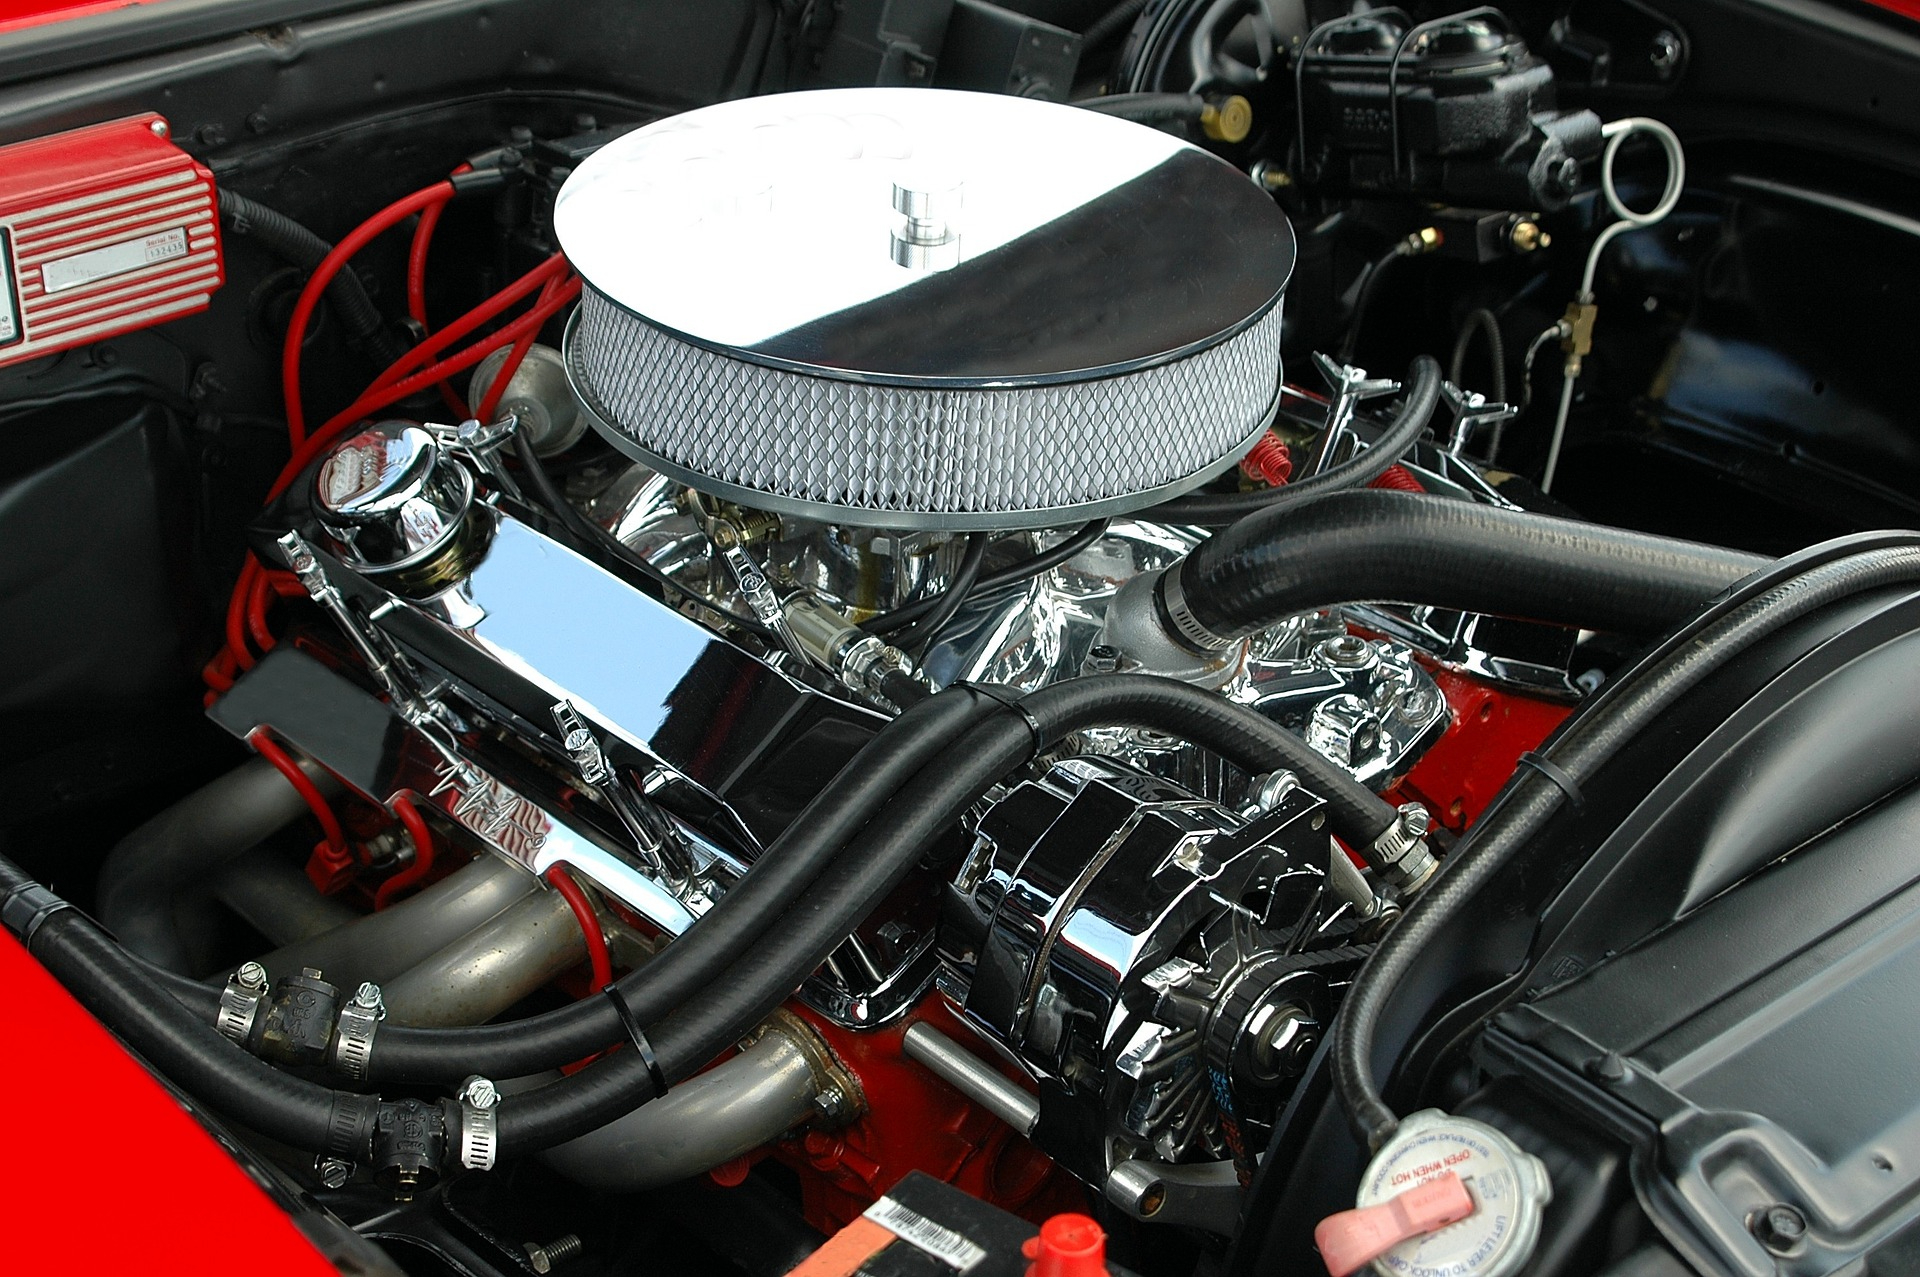 What Are The Benefits Of Engine Remapping?